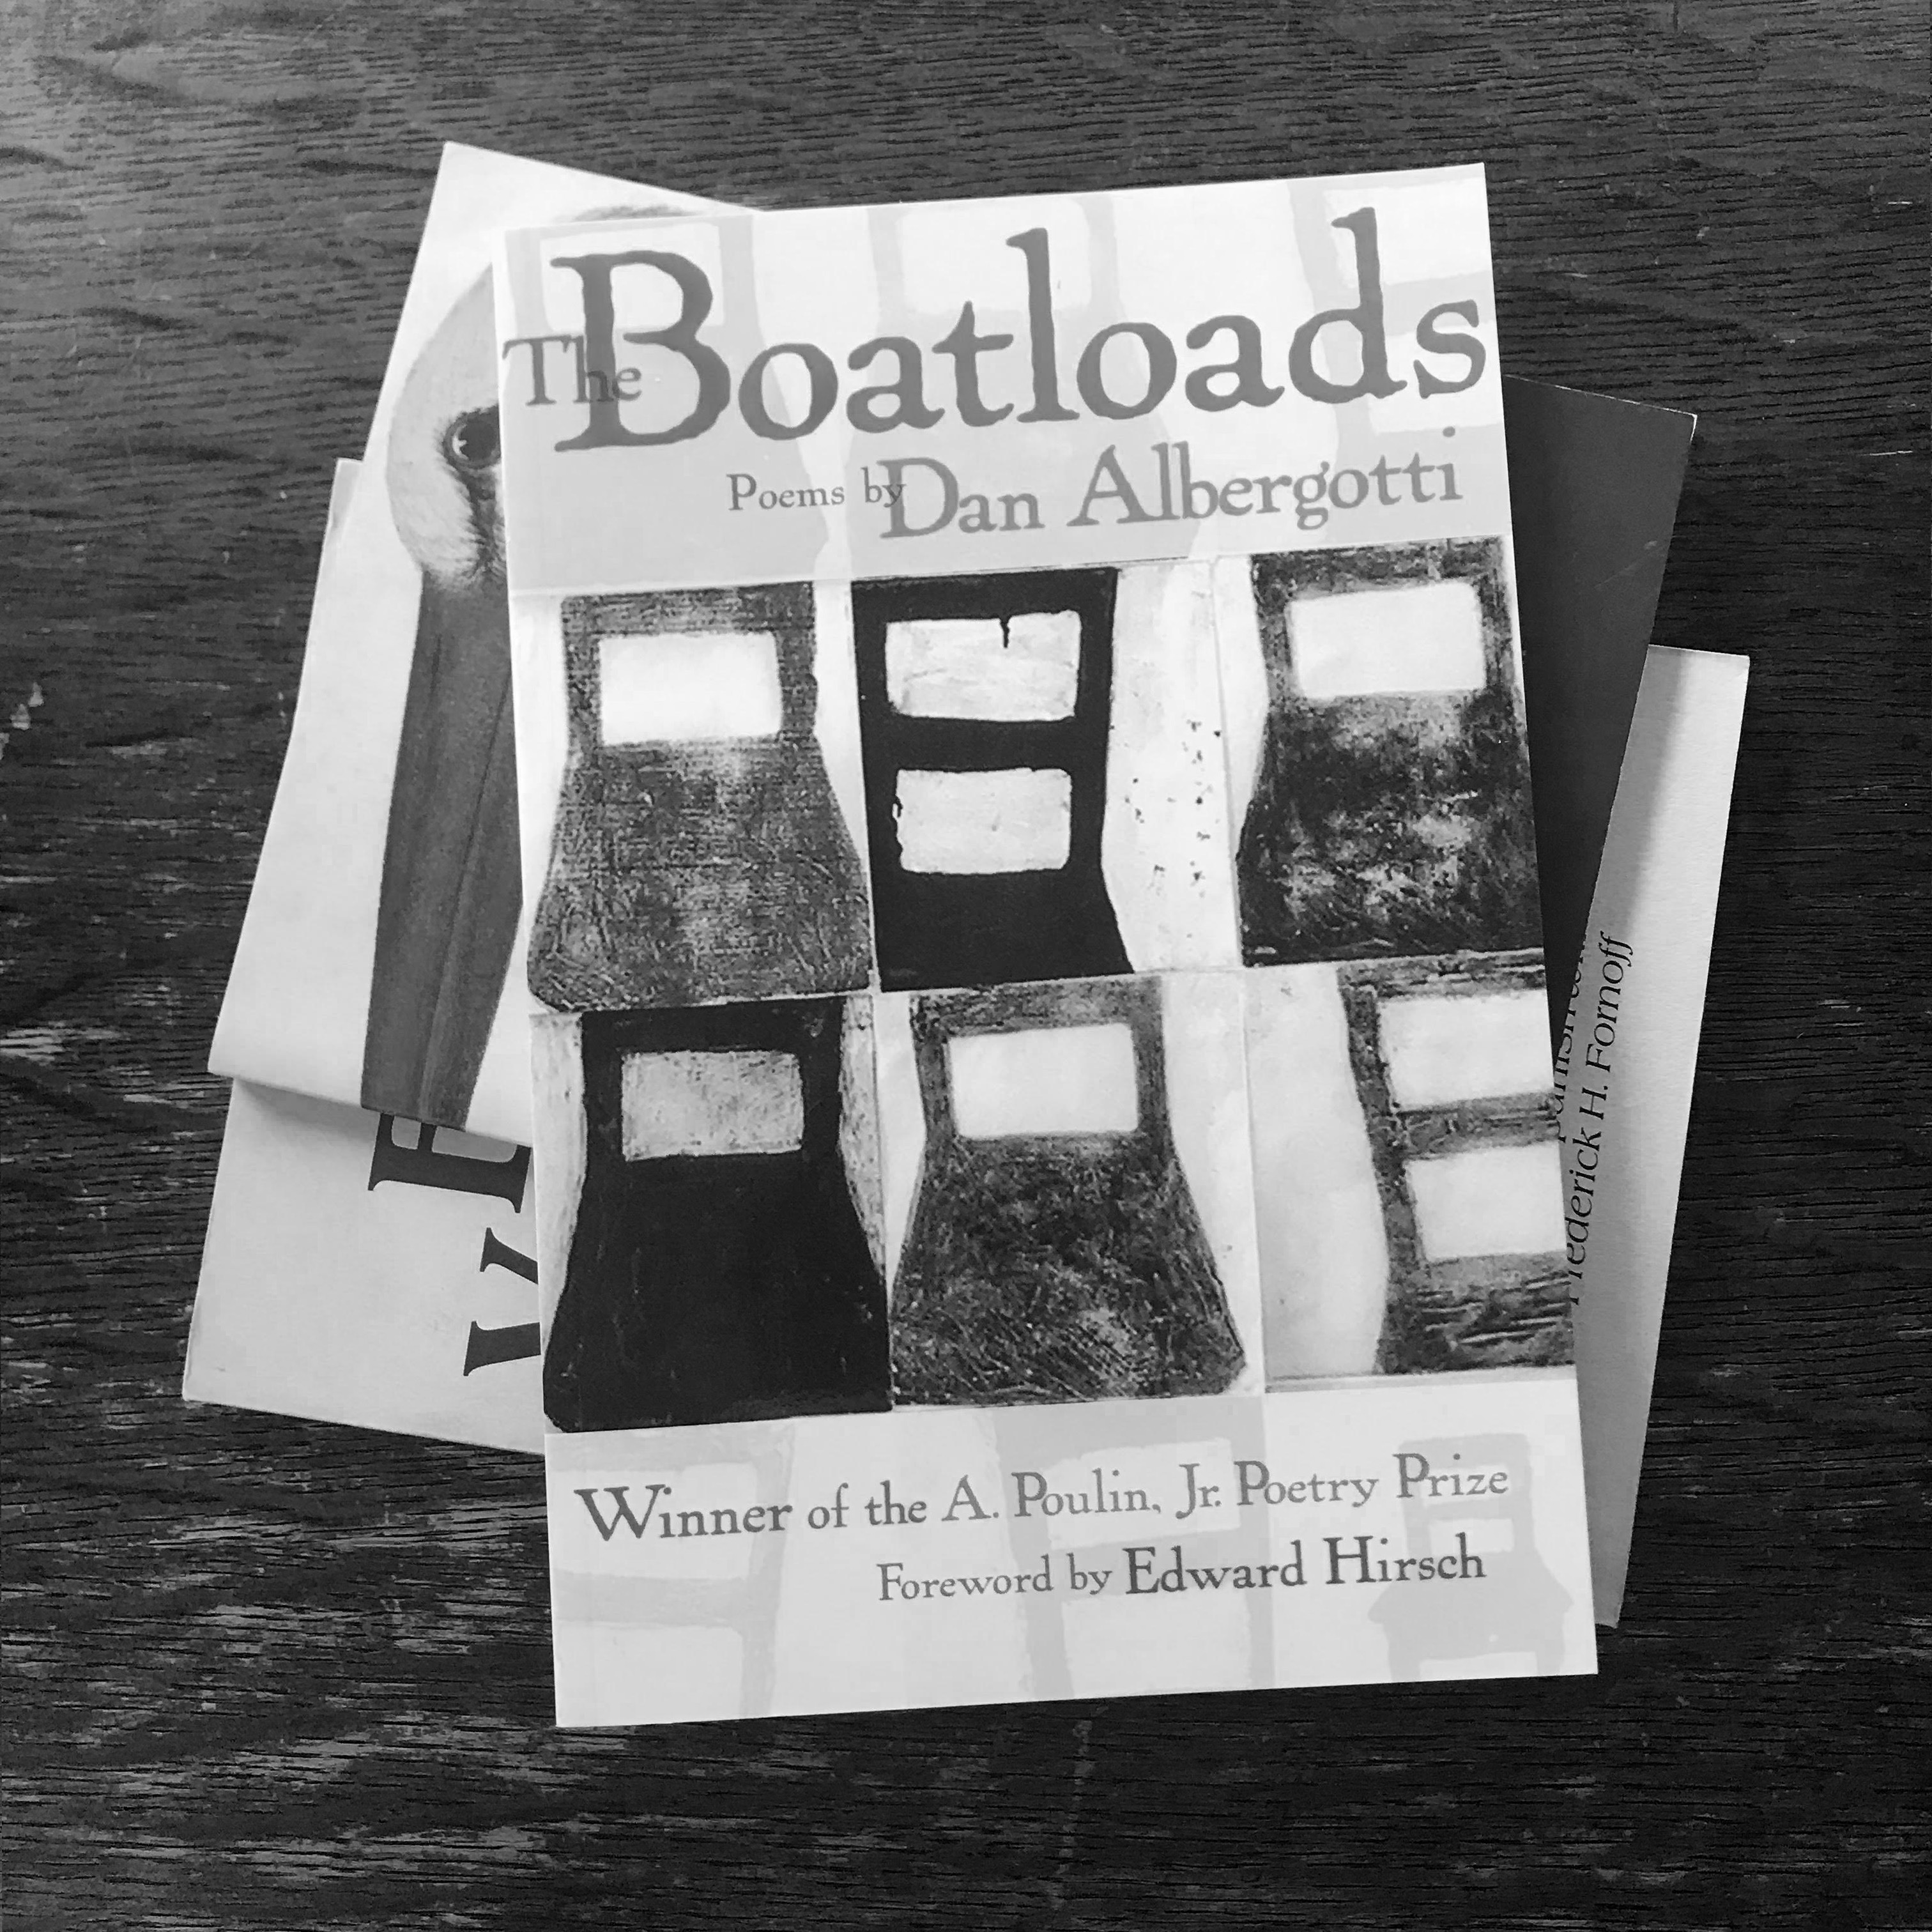 Poetry Review: The Boatloads Poems by Dan Albergotti